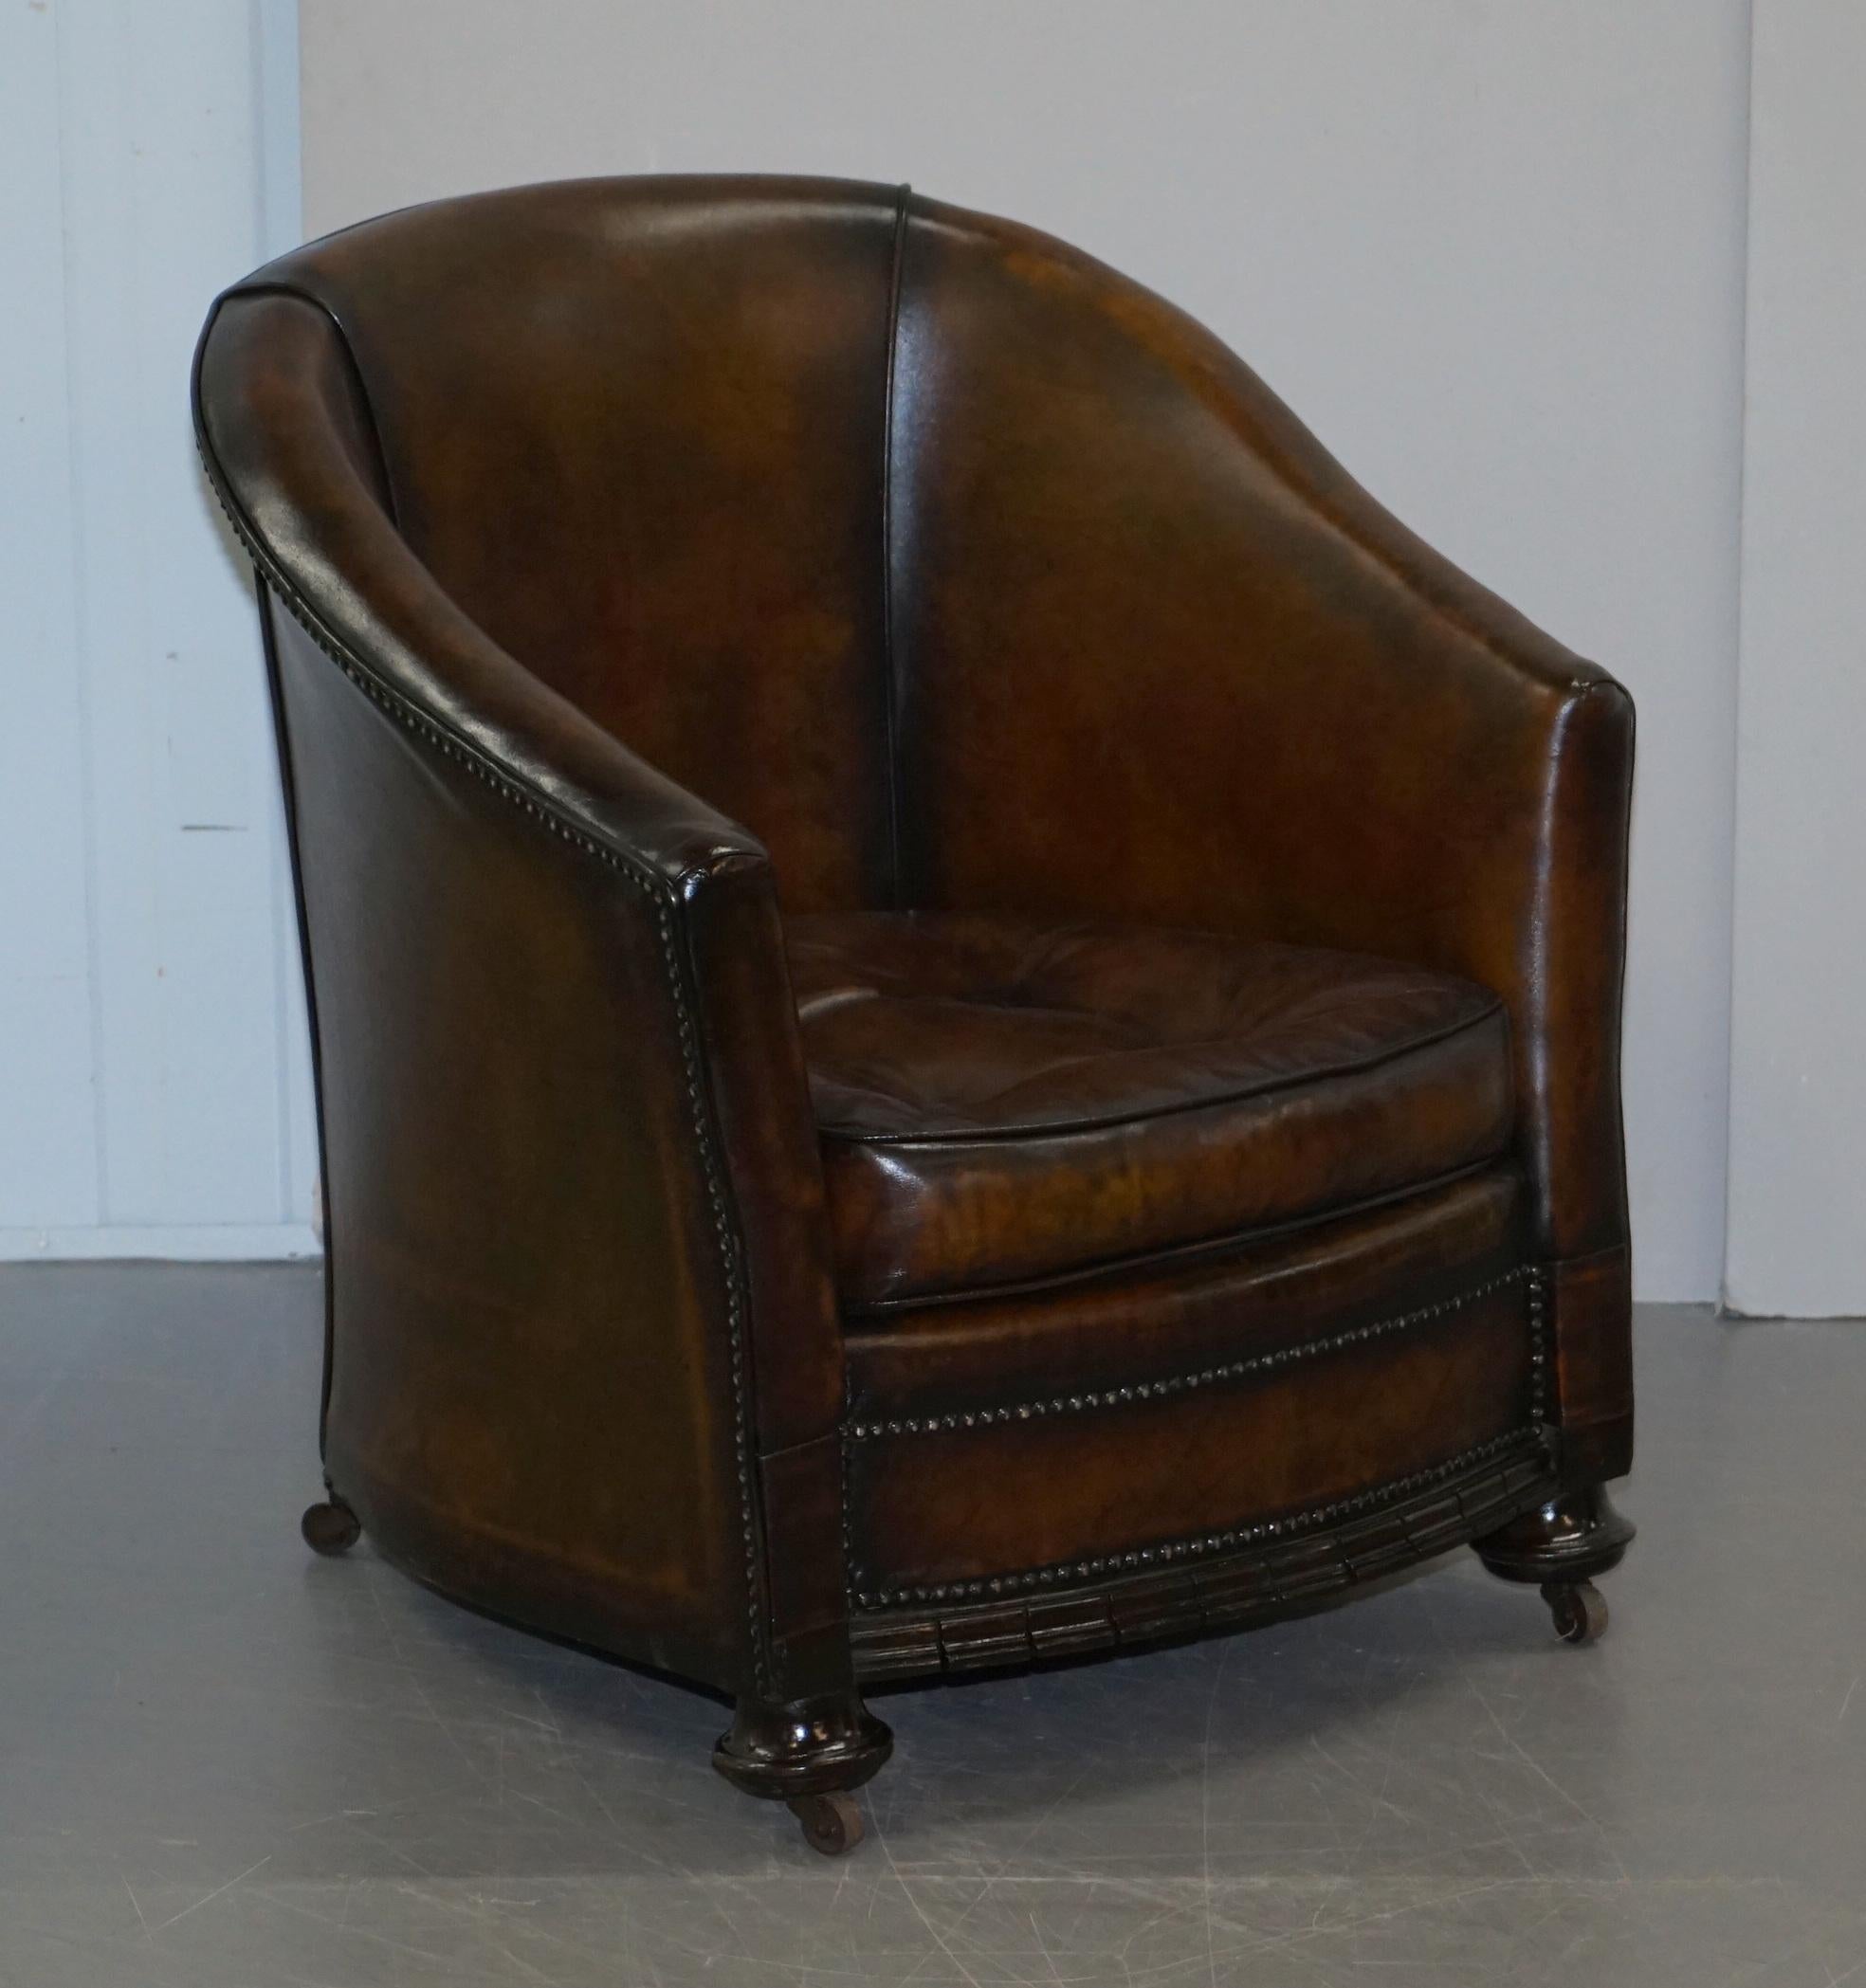 We are delighted to offer for sale this lovely pair of original late Victorian circa 1880-1890 fully restored hand dyed cigar brown leather club or tub armchairs with Thomas Chippendale floating Chesterfield buttoned feather filled cushions

These